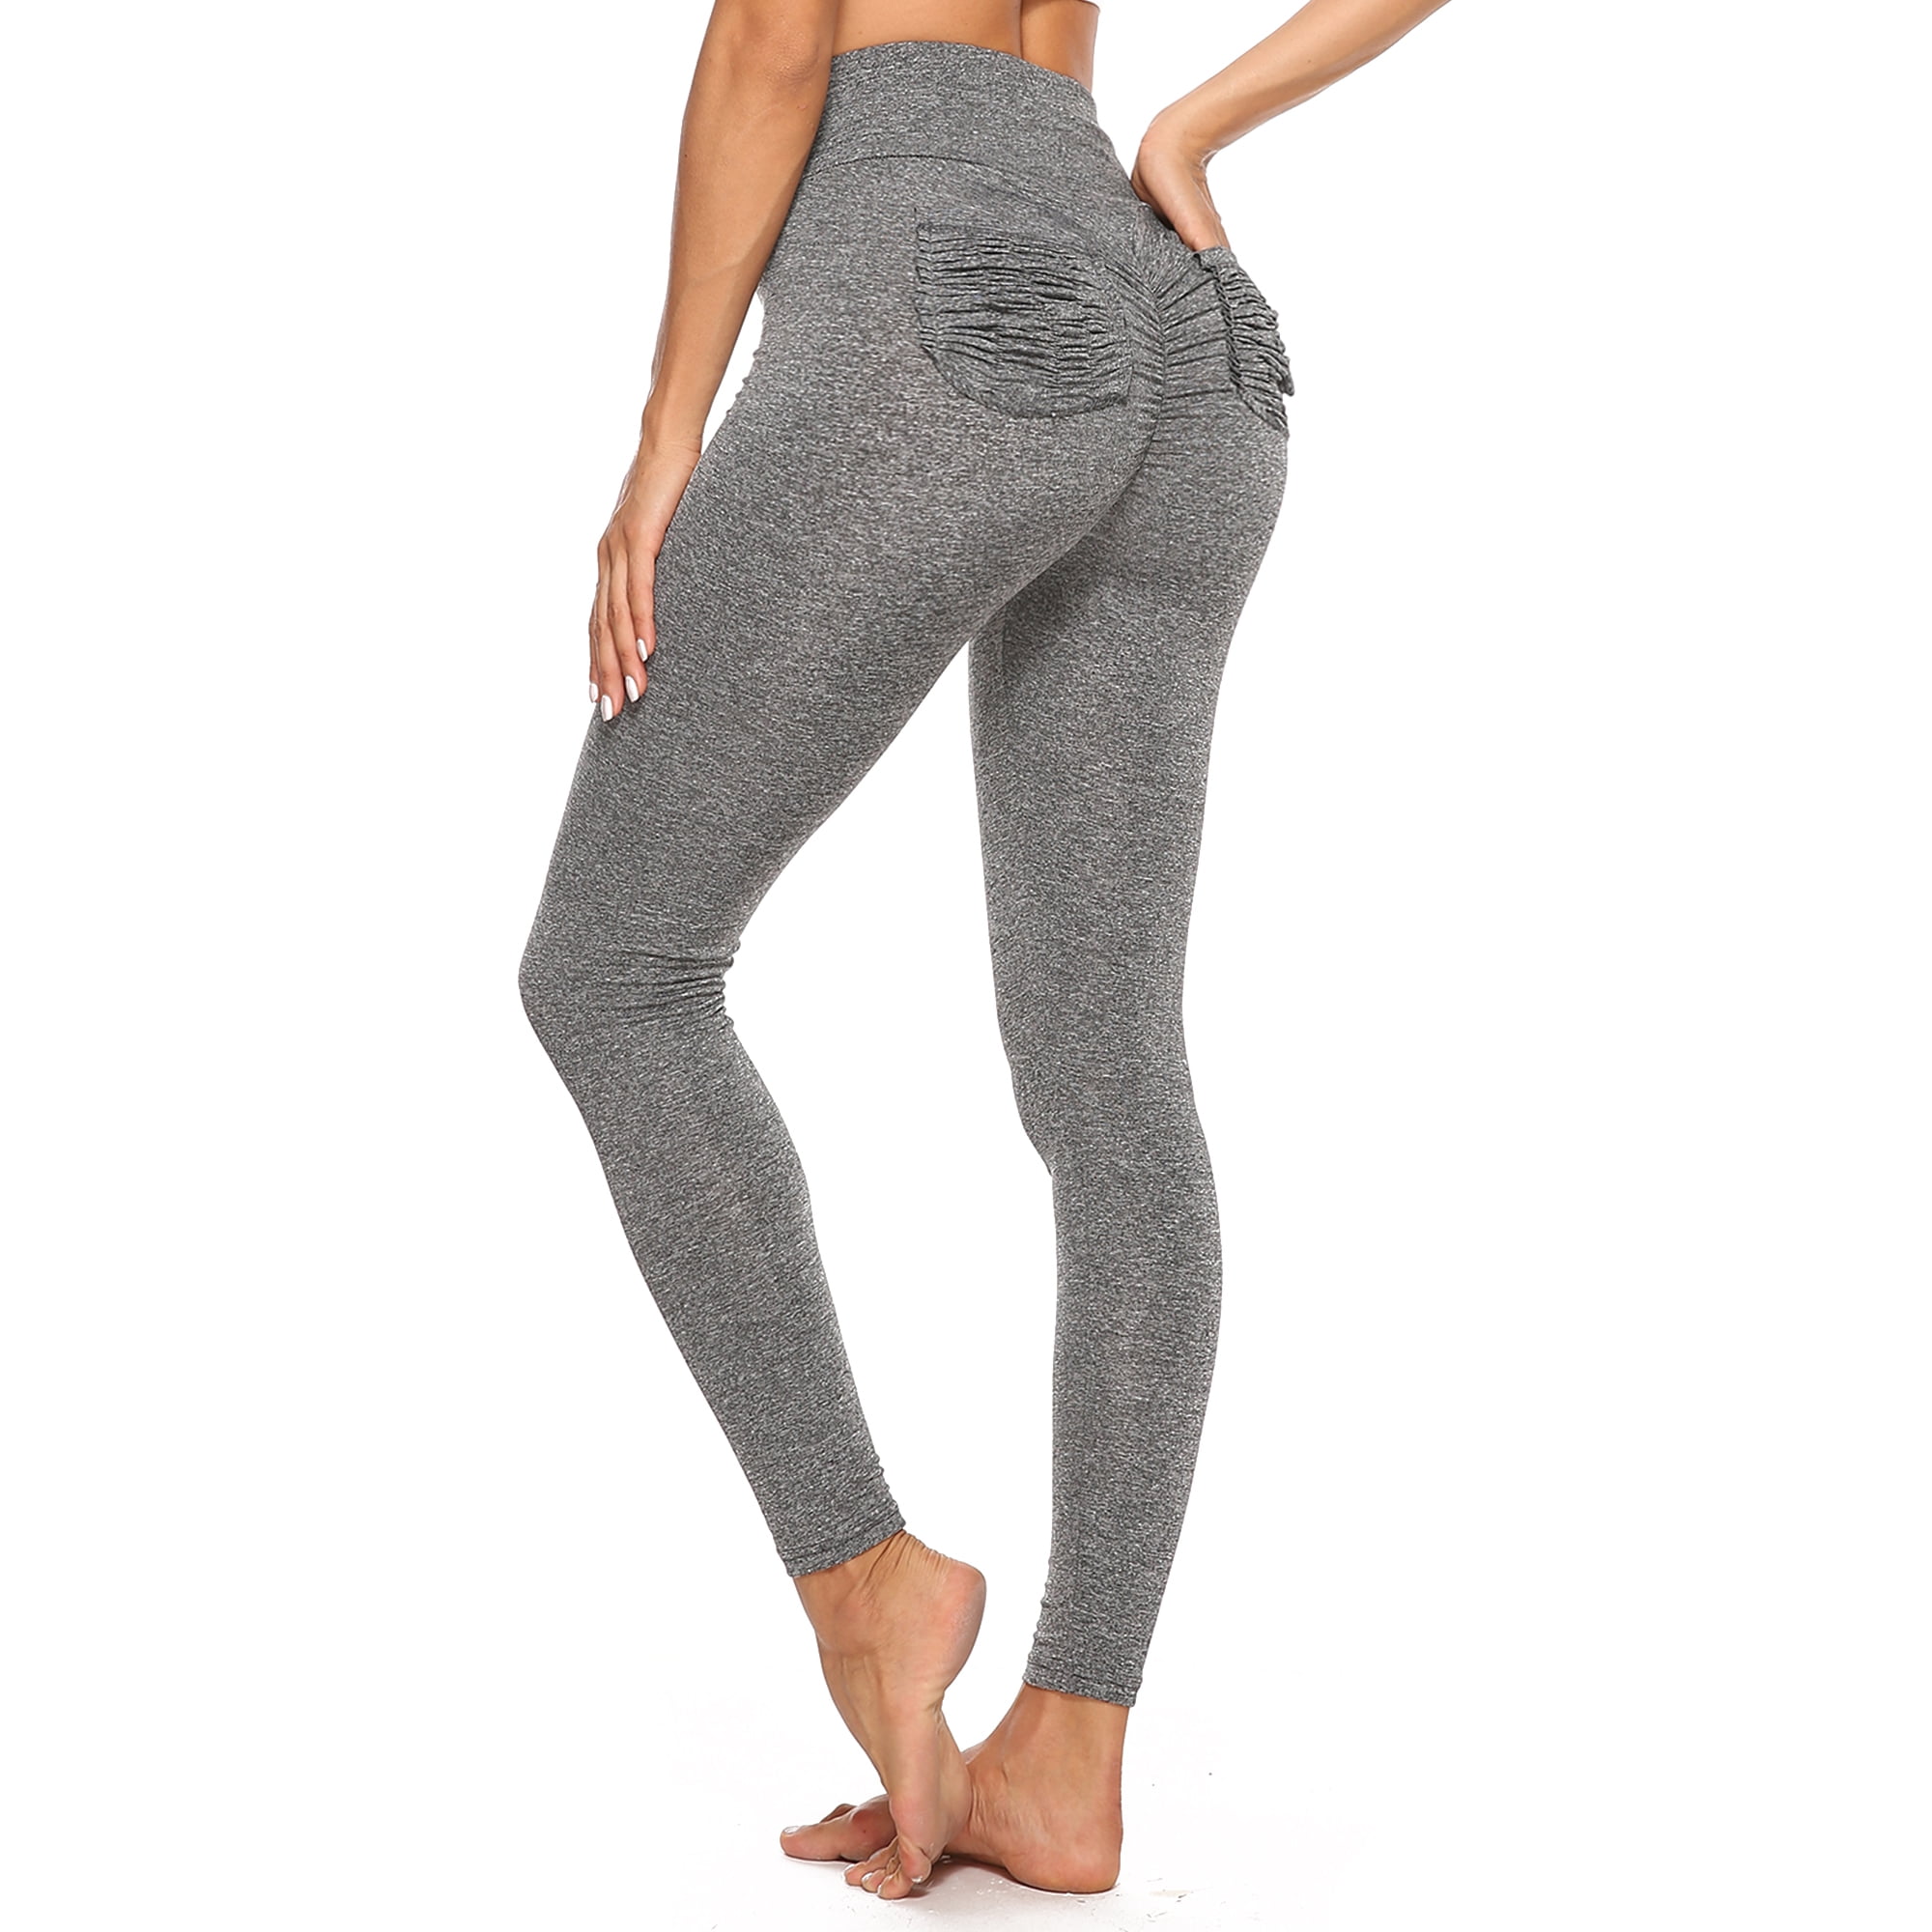 Fittoo Fittoo Gym Leggings Scrunch Ruched Butt Booty With Pockets High Waist Yoga Pant Workout